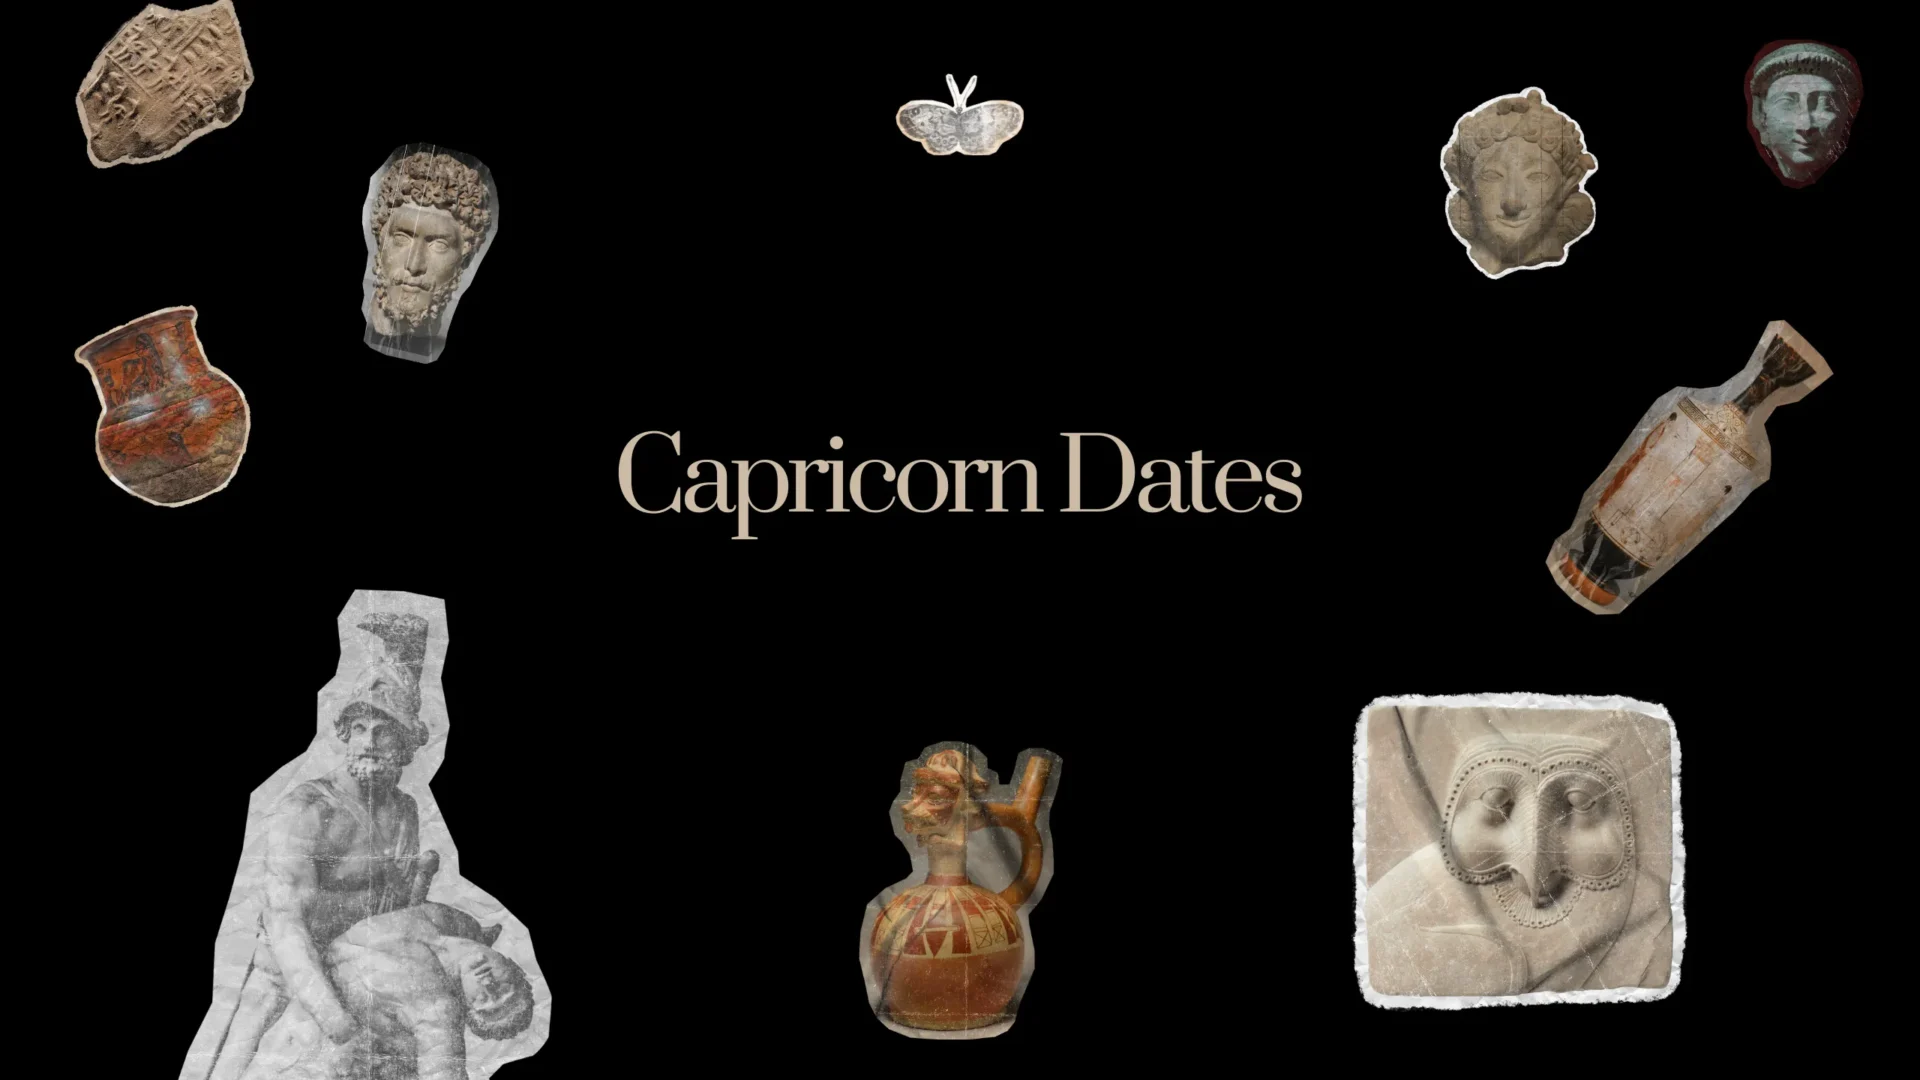 10 Surprising Facts About Capricorn Dates You Never Knew!